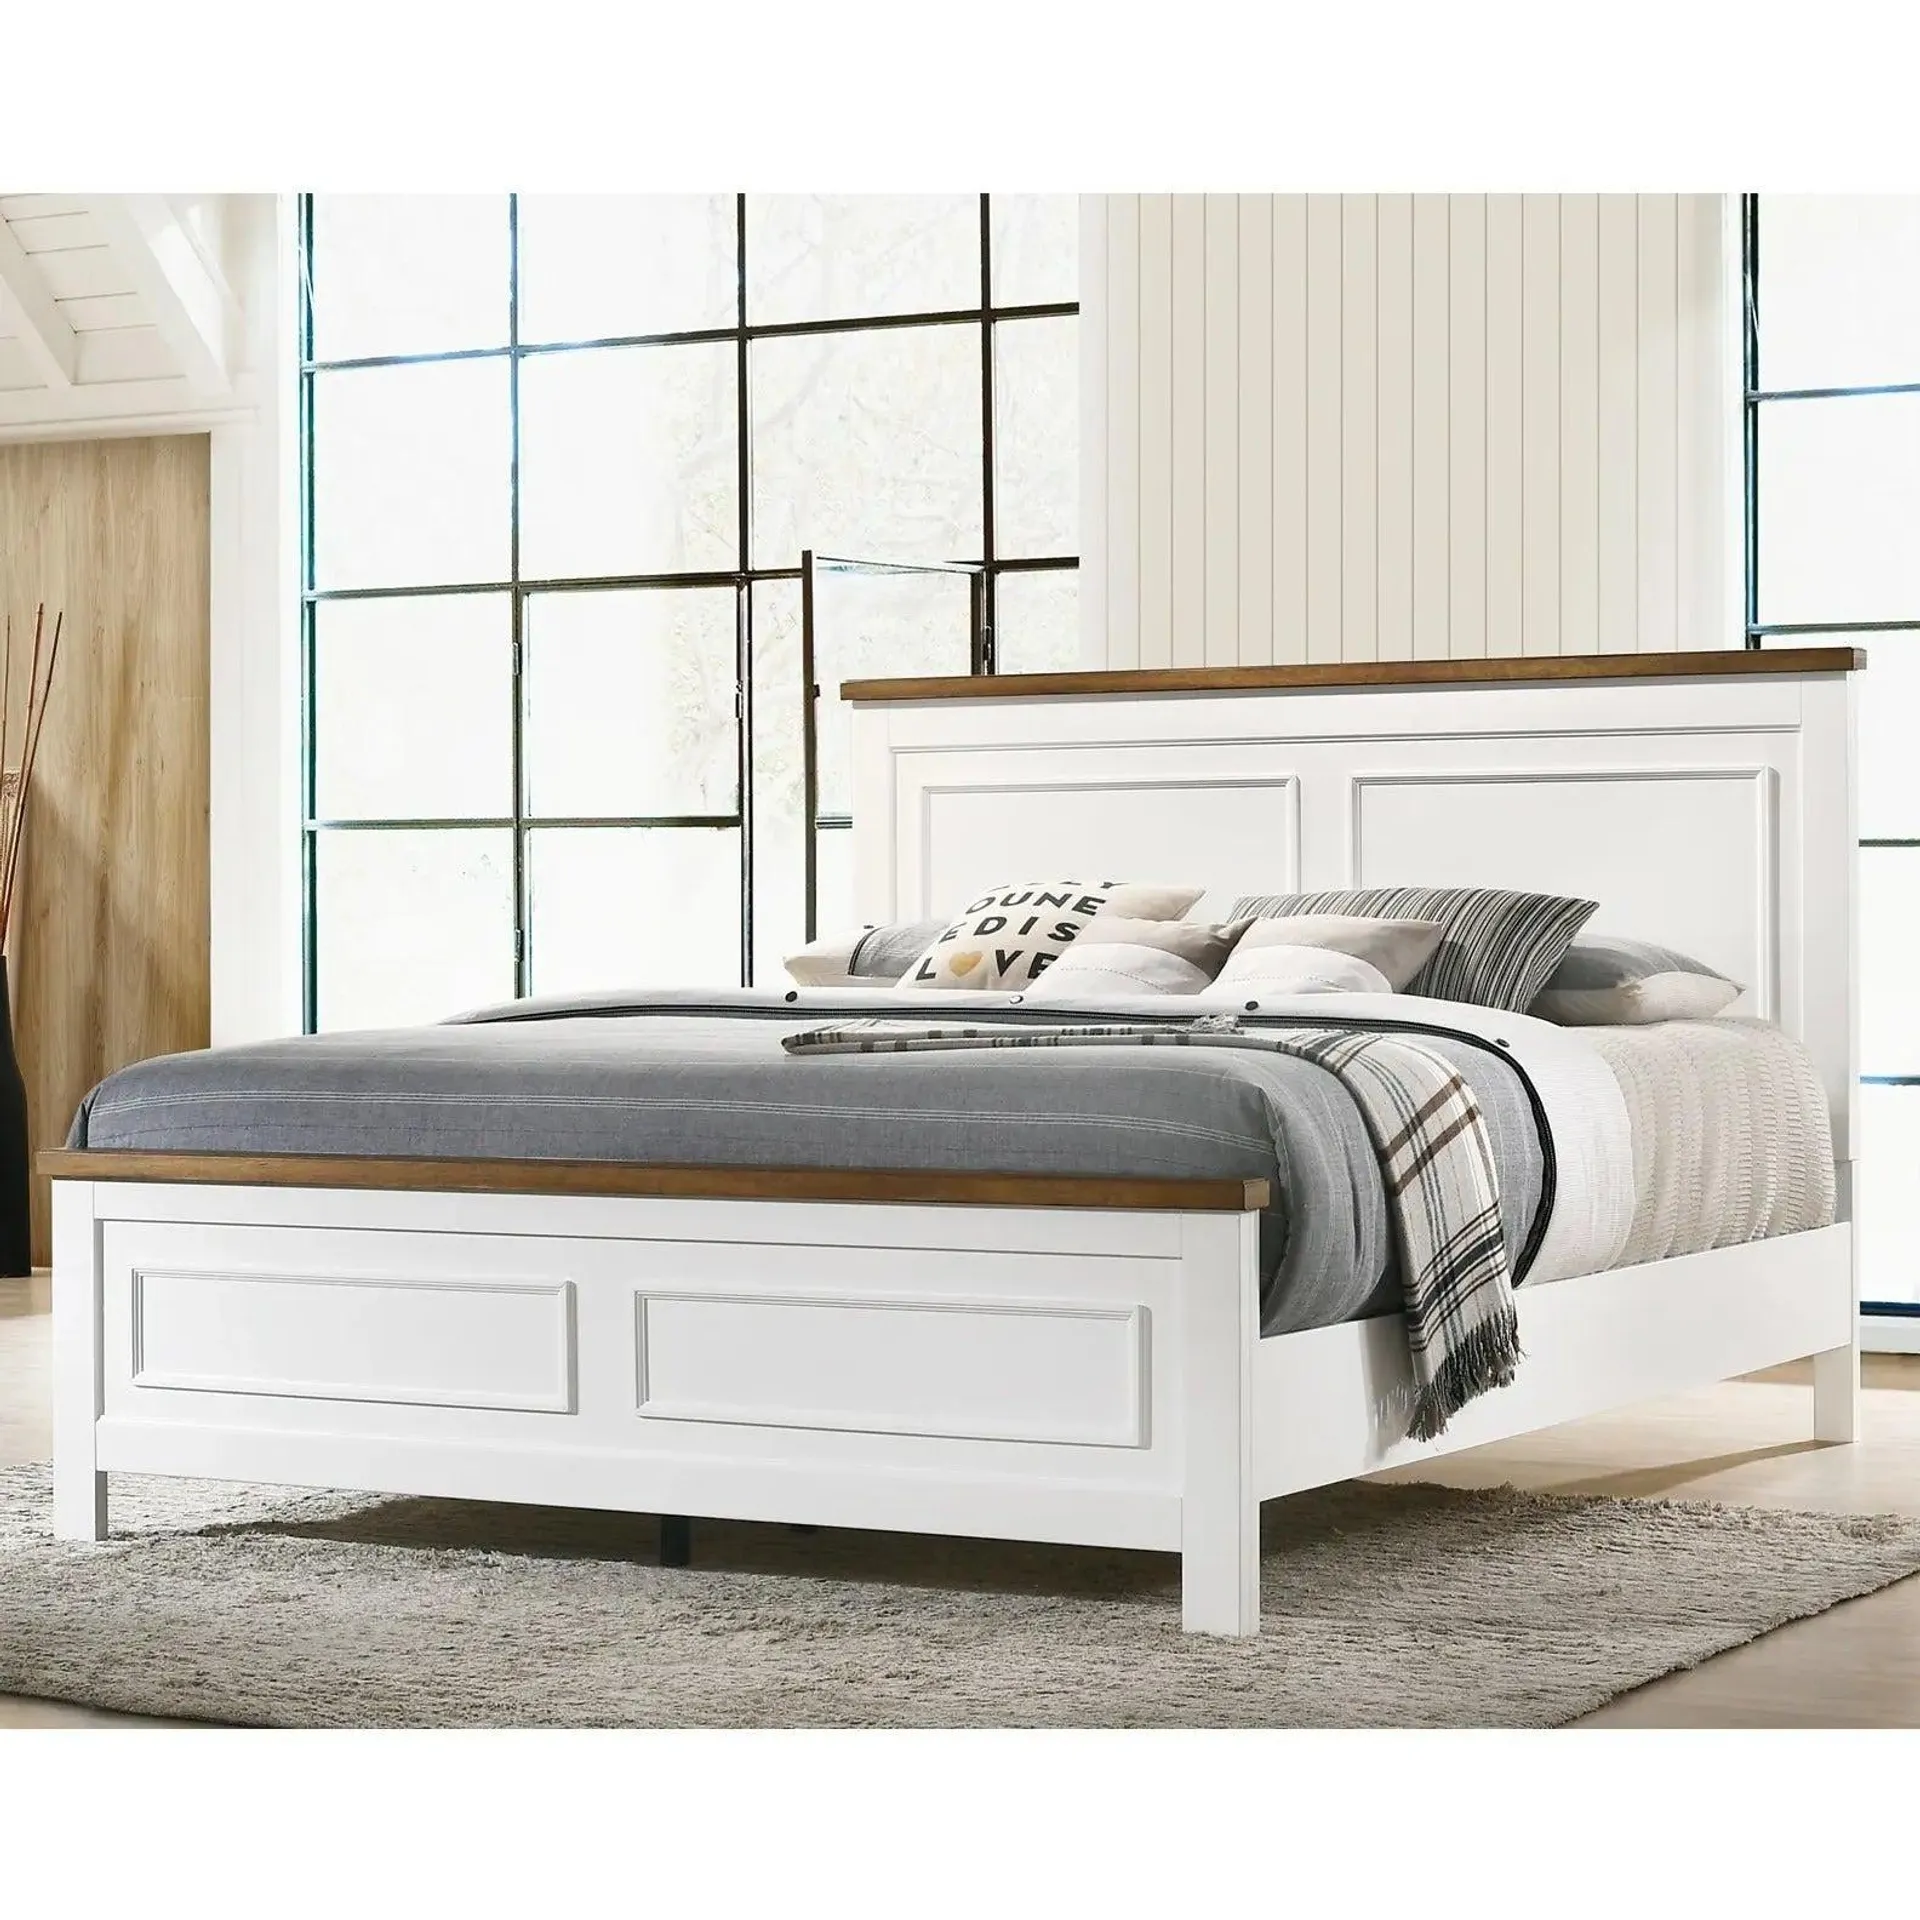 Westconi Package - King Bed